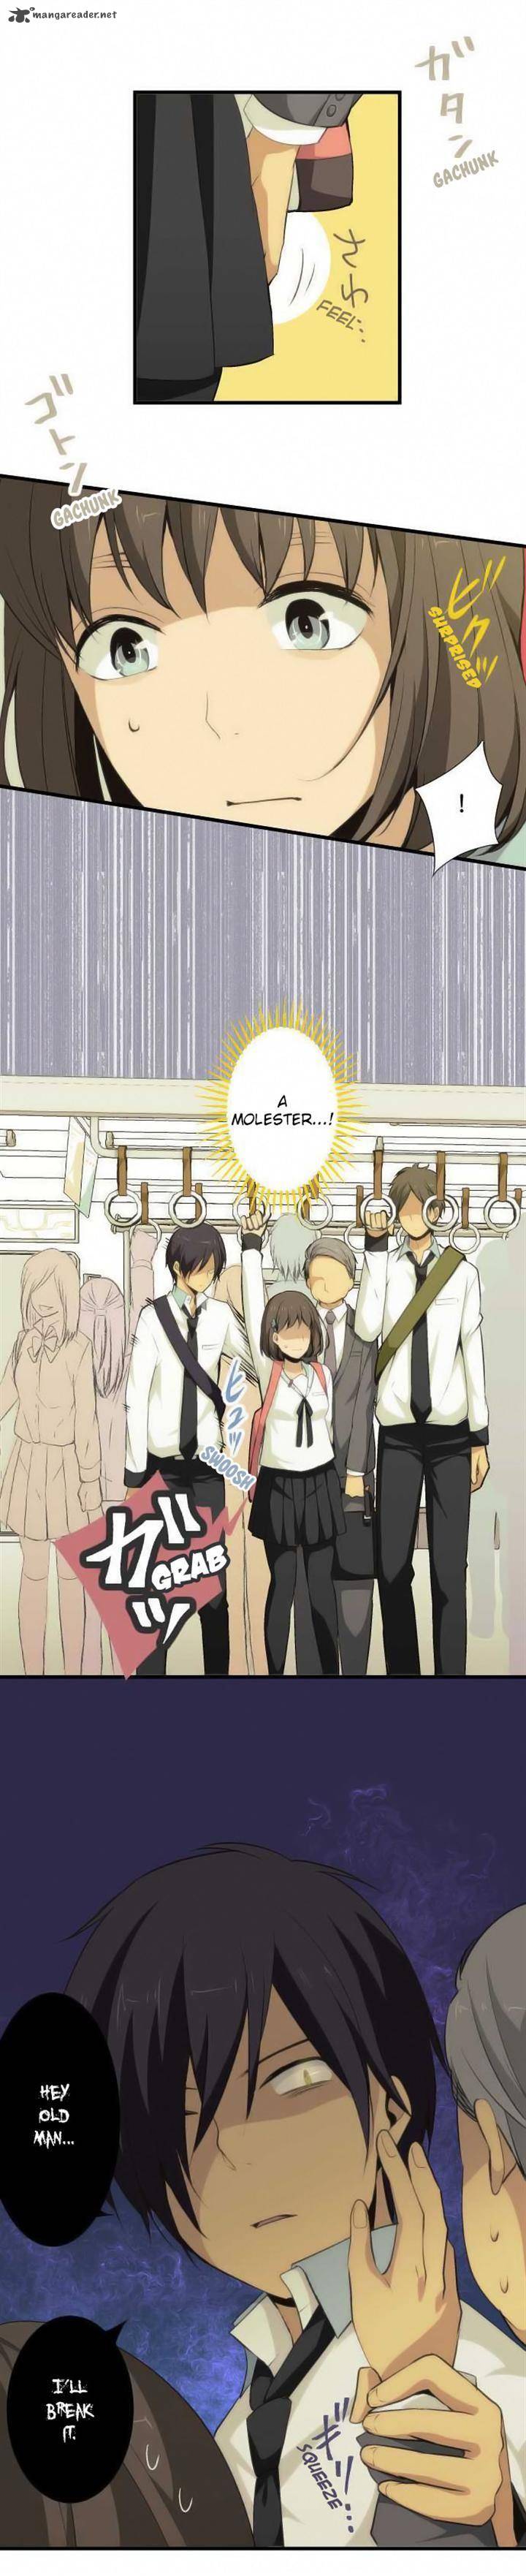 Relife 62 2